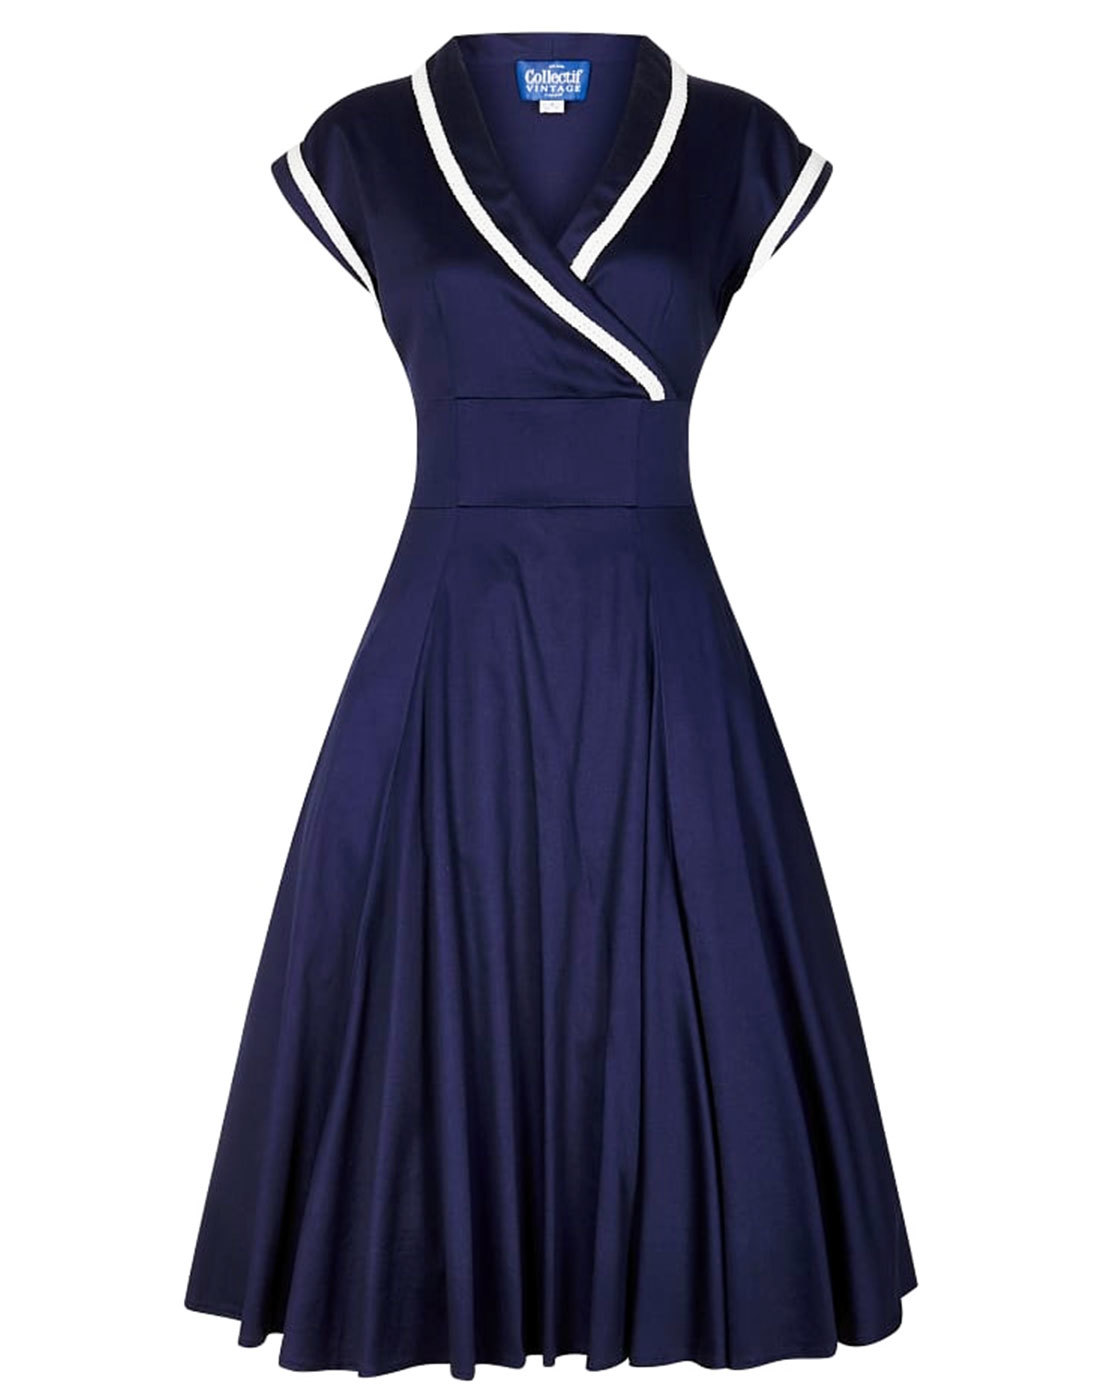 COLLECTIF Yoshima Vintage 1950s Crossover Front Swing Dress Navy